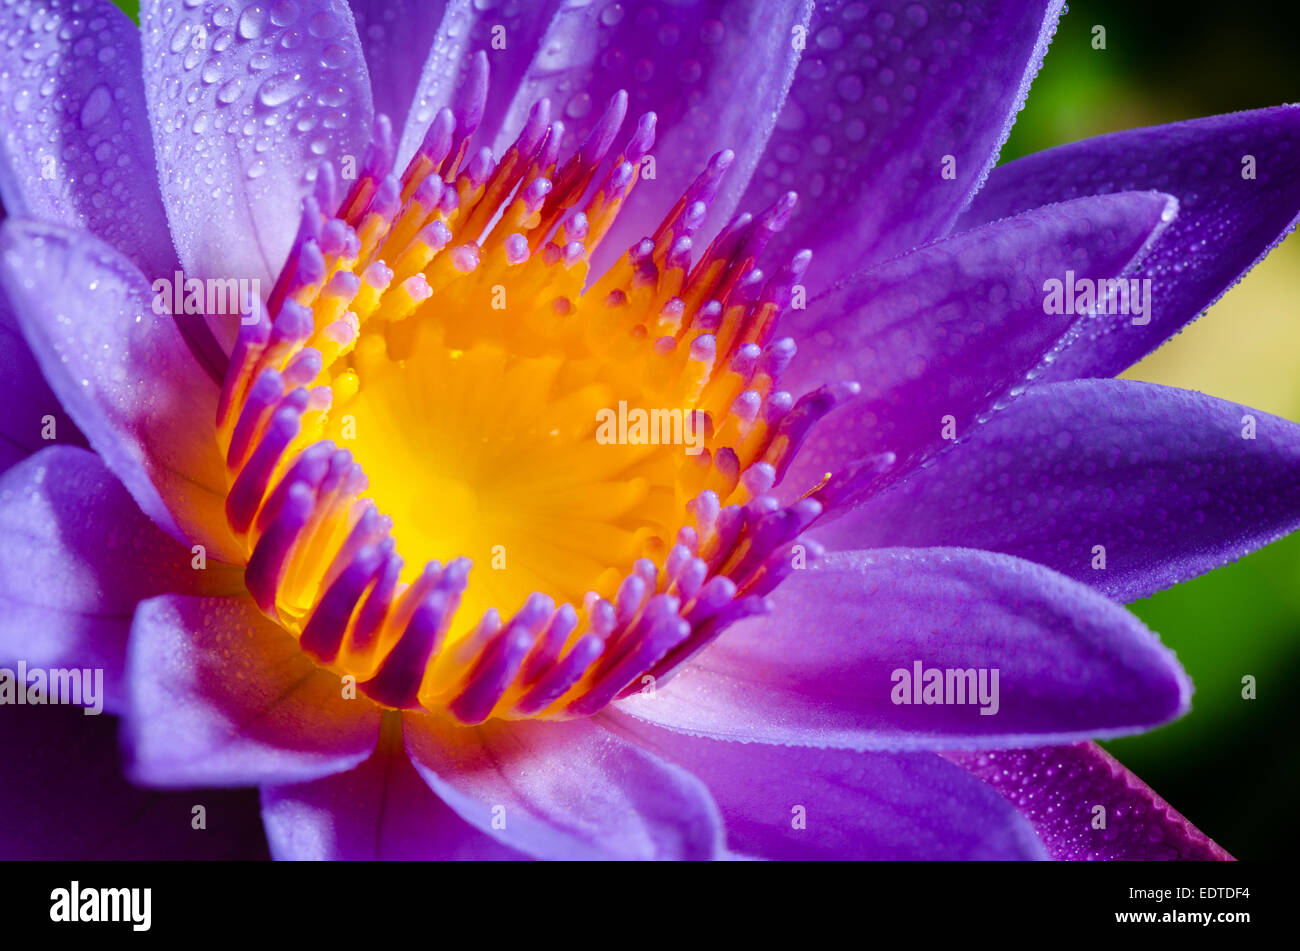 Close up yellow carpel and water drops on violet Lotus or Water Lily flower Stock Photo